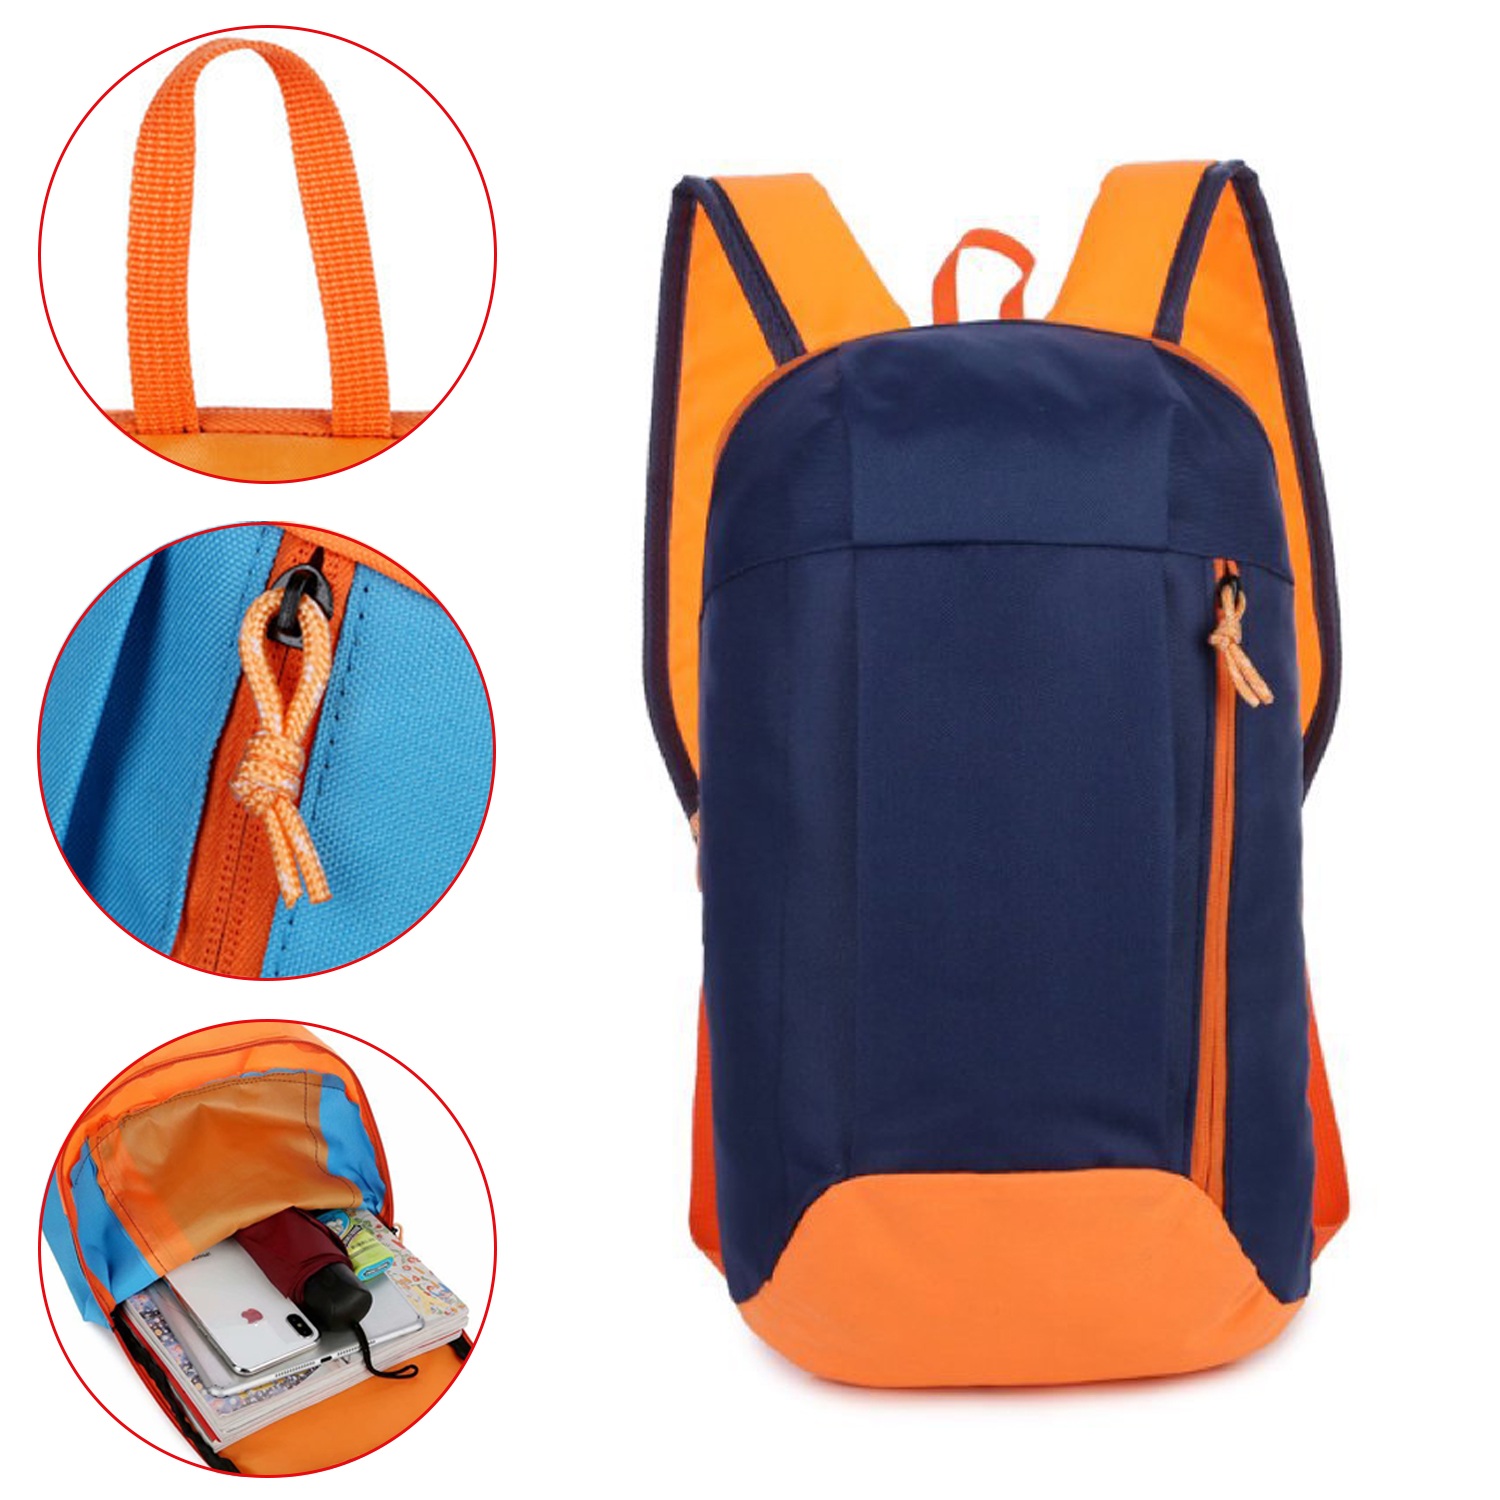 Backpack Waterproof Backpack Cover Multi-Functional Hiking And Travel Bag Pack Outdoor Riding Bag Leisure Backpack